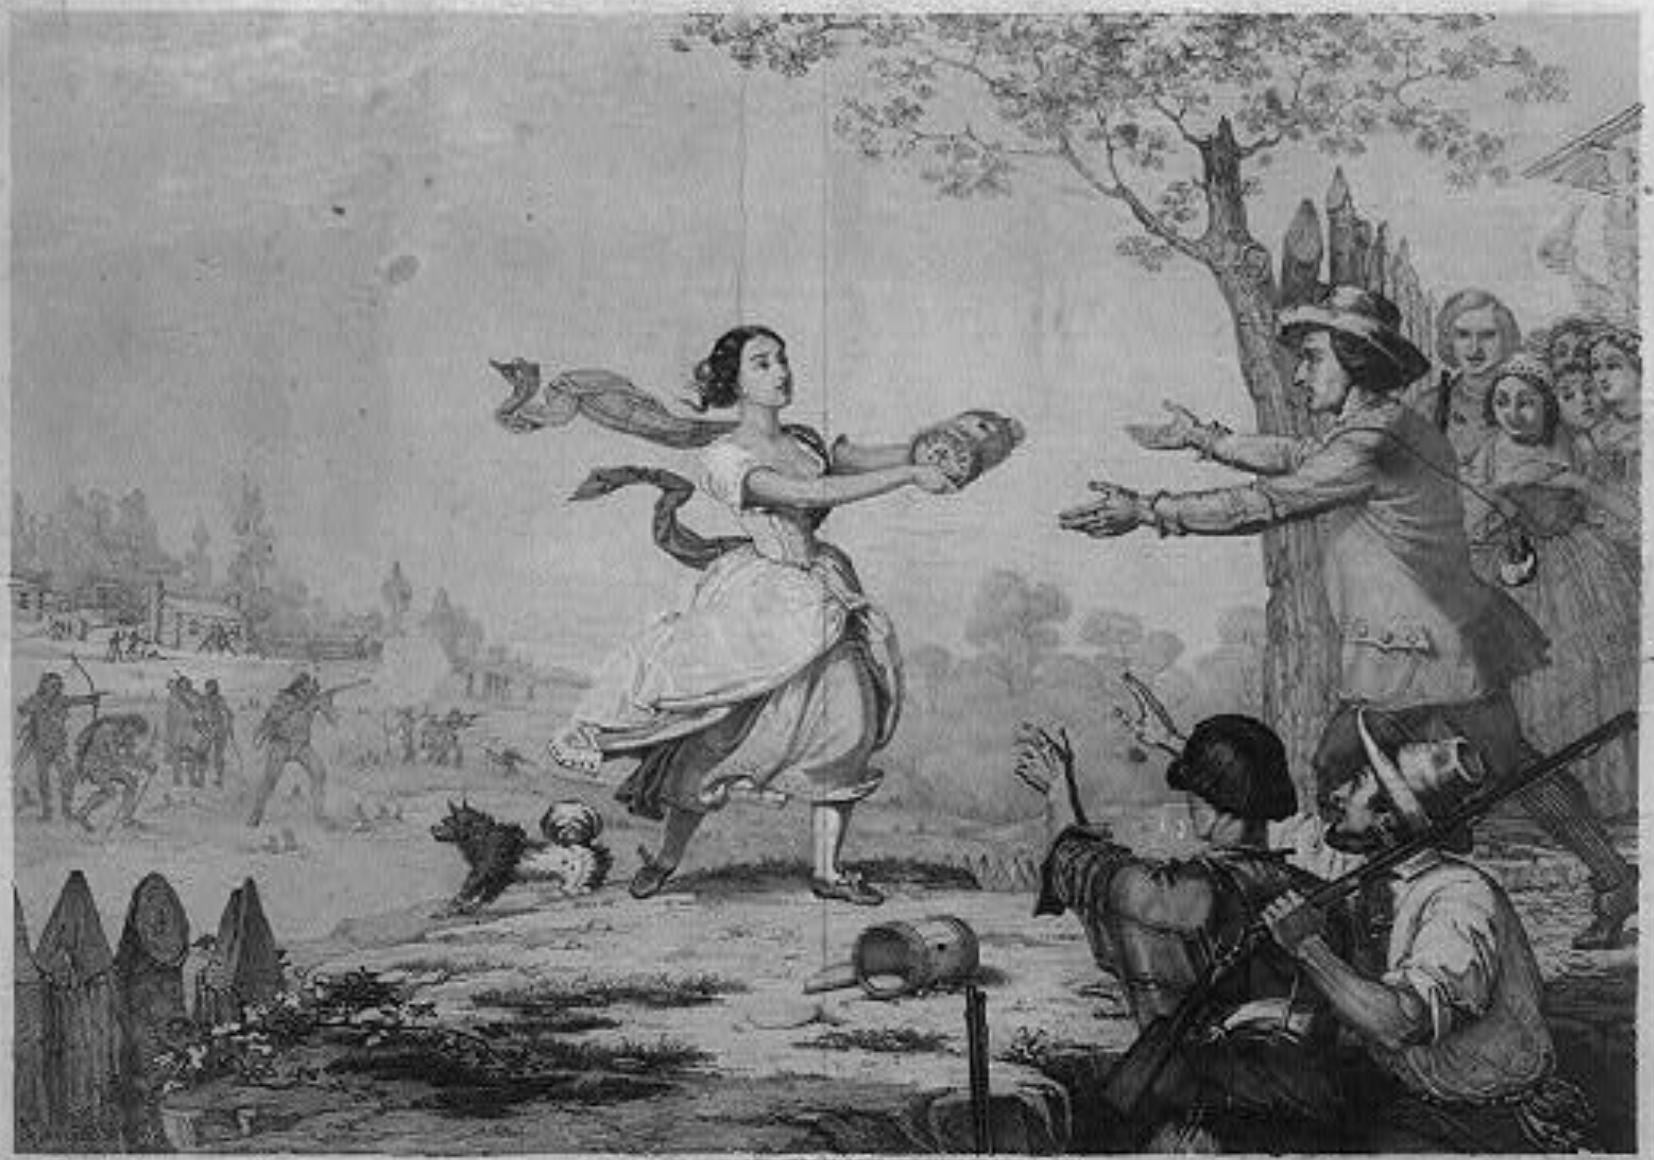 "Heroism of Miss Elizabeth Zane" depicts Elizabeth Zane's legendary feat of retrieving powder during the siege of Fort Henry during the American Revolutionary War. Lithograph by Nagel and Weingaertner. Public Domain. 